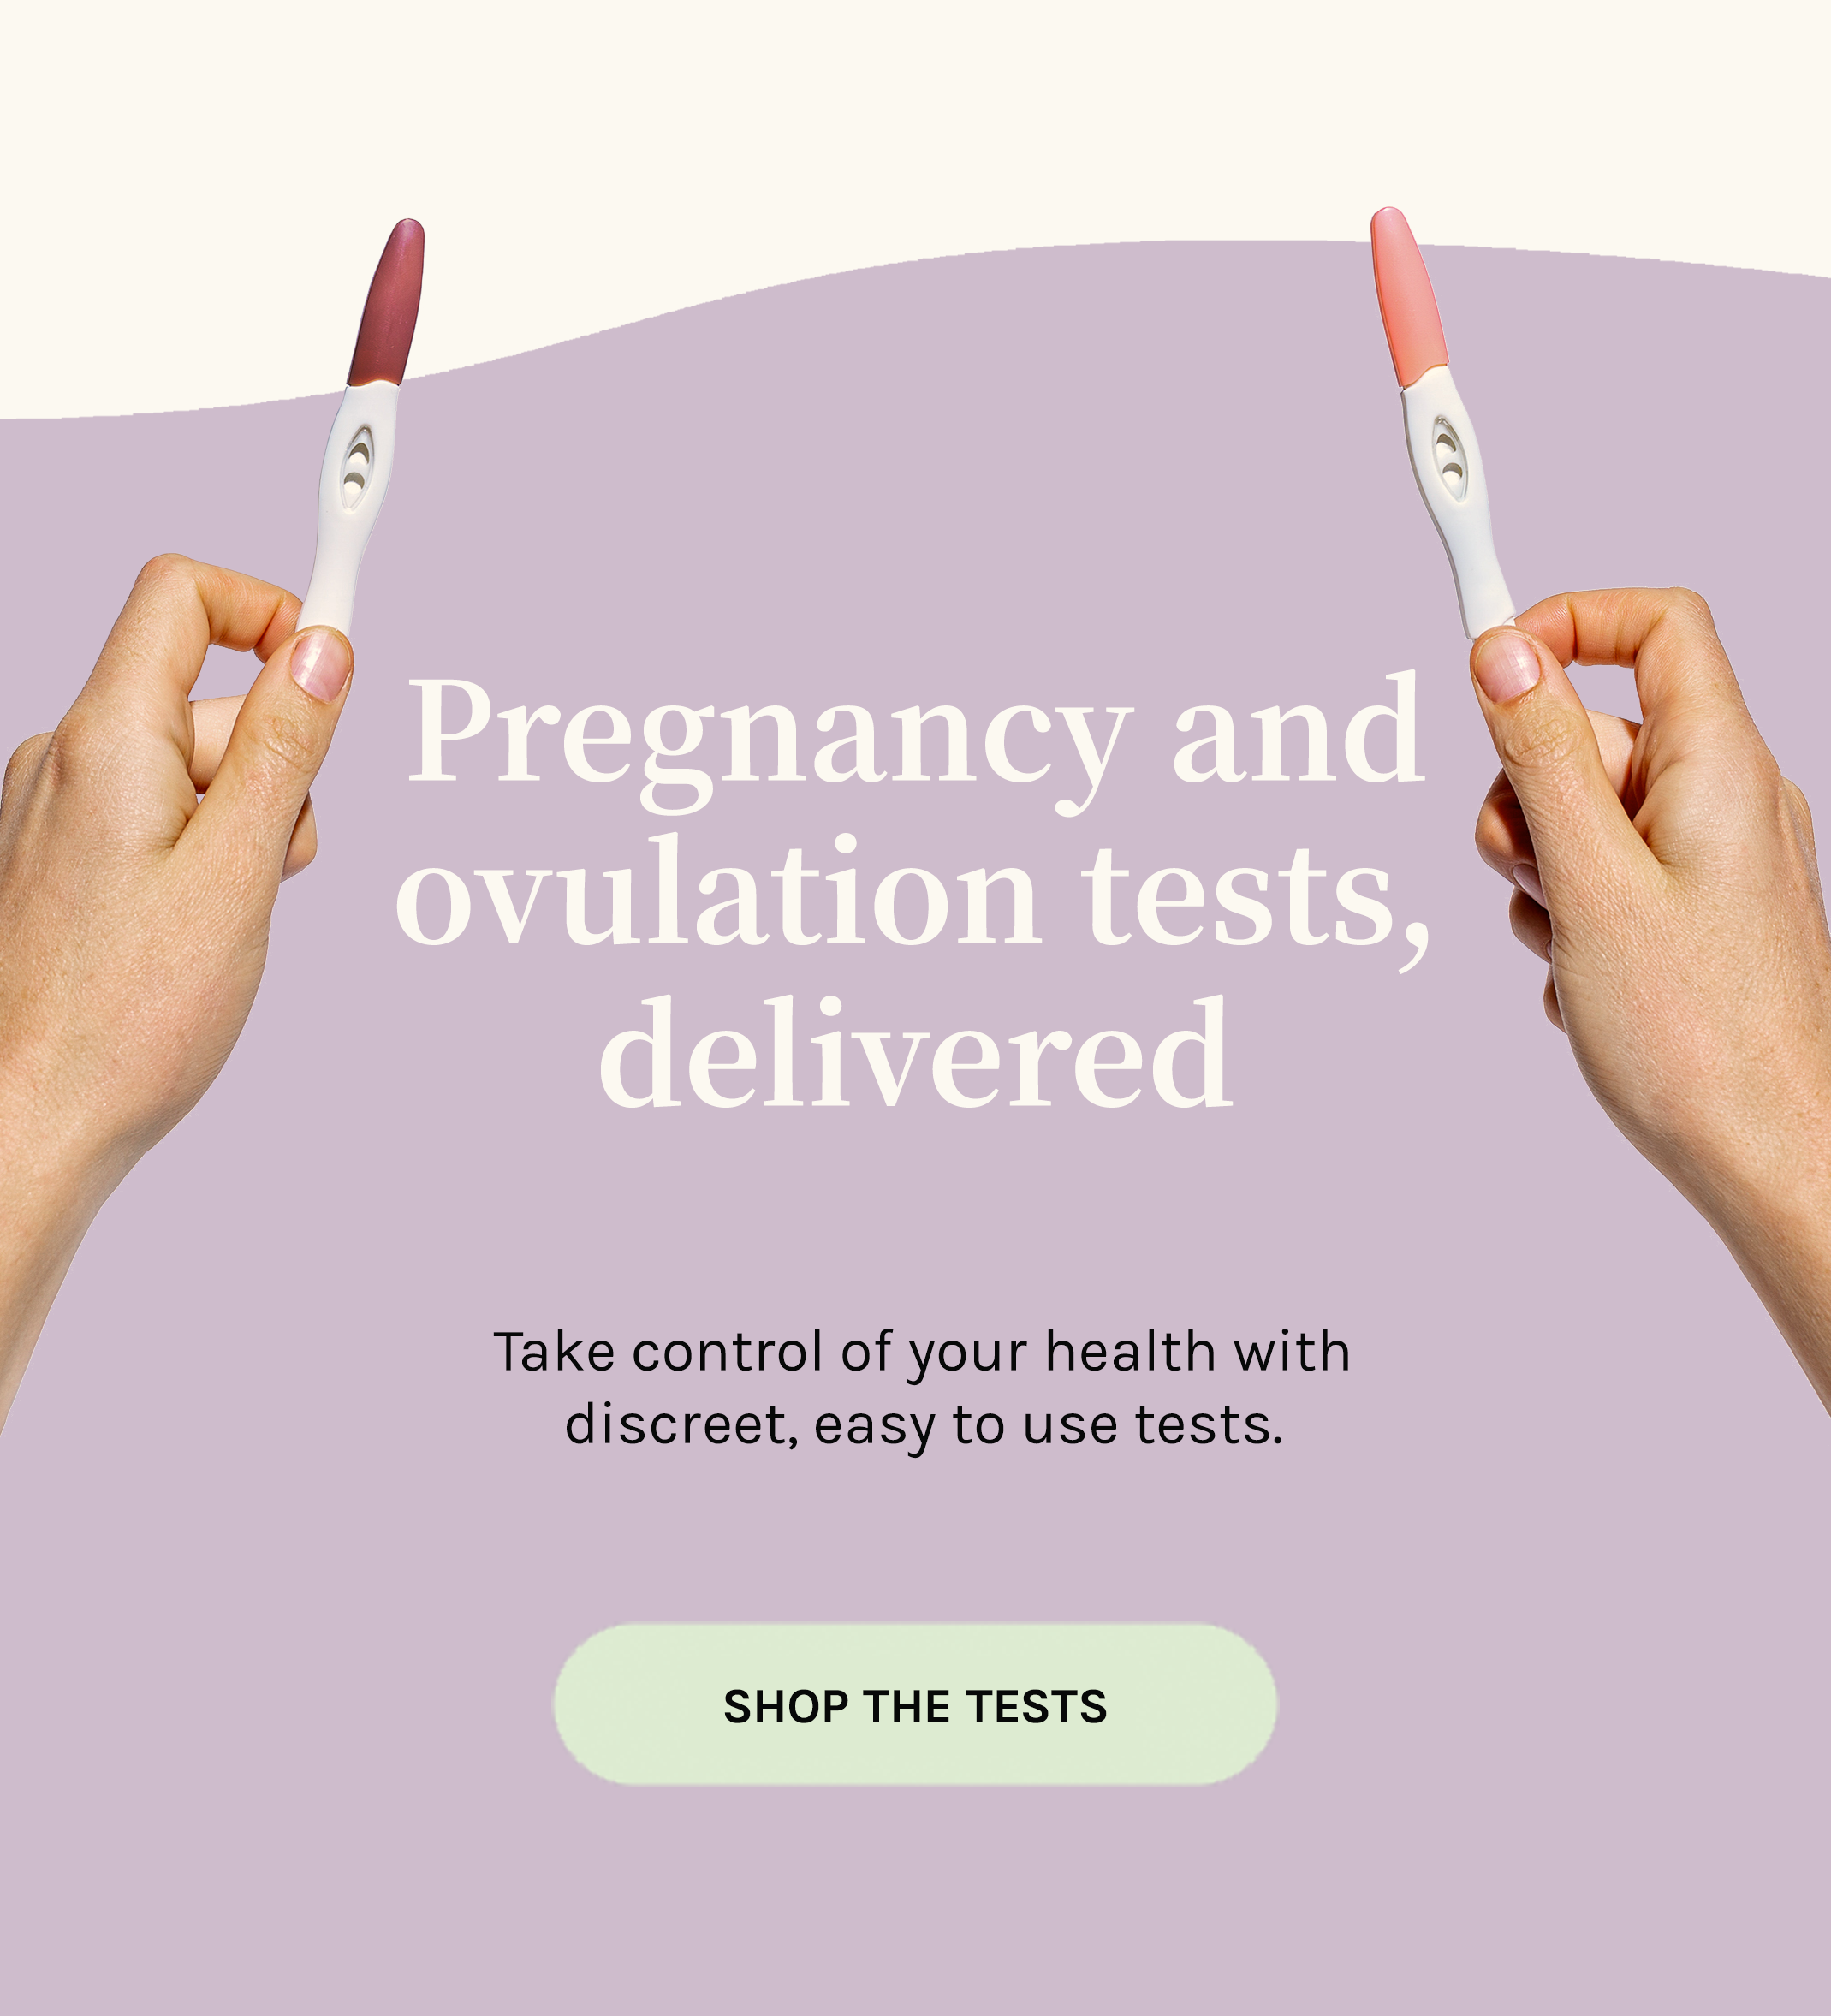 Pregnancy and ovulation tests, delivered. Take control of your health with discreet, easy to use tests.